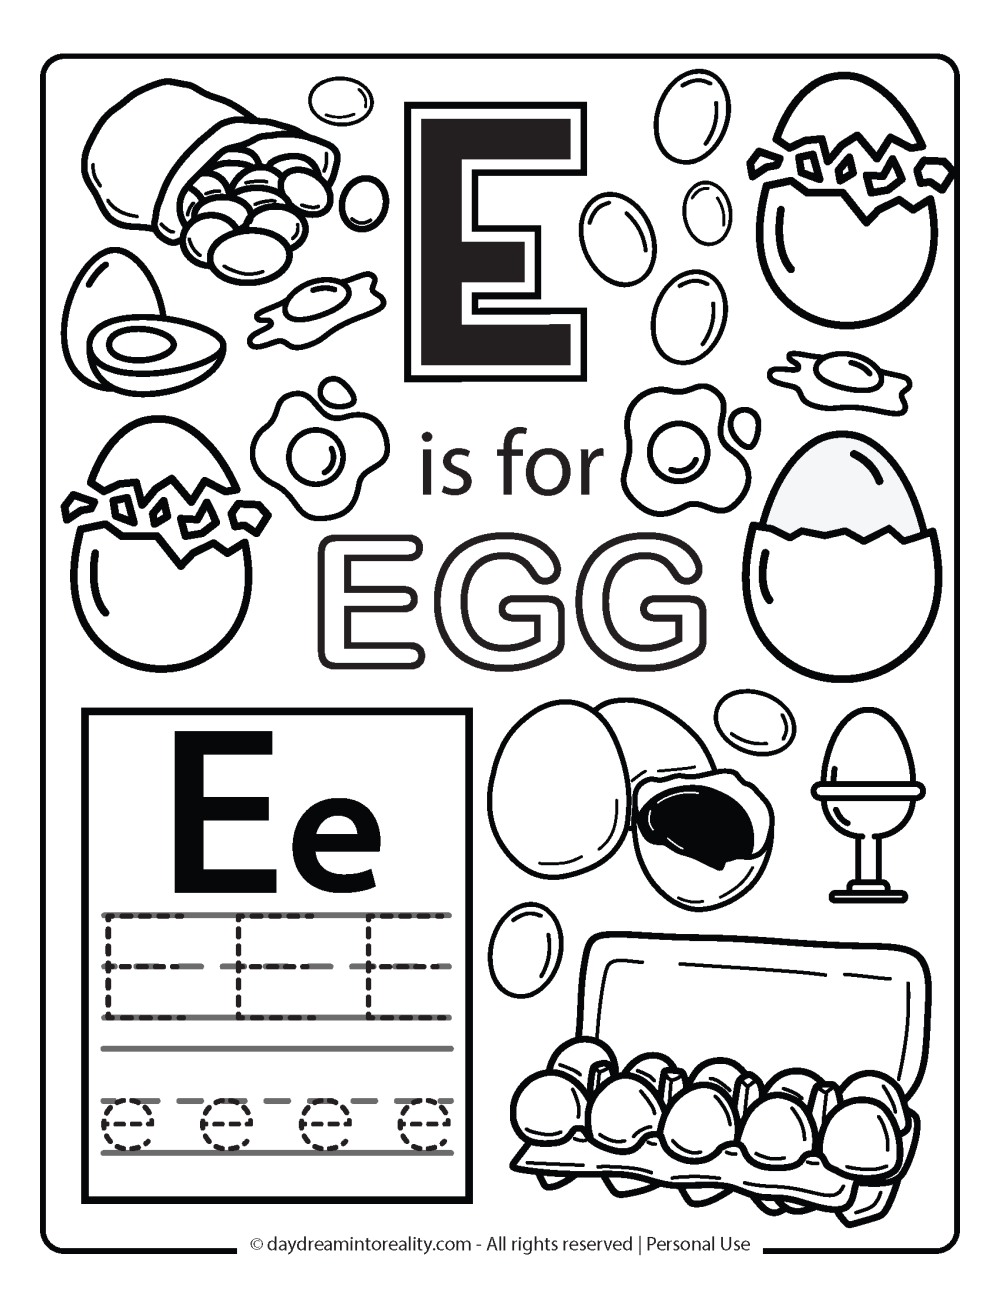 Letter E coloring page worksheet free printables. E is for egg.